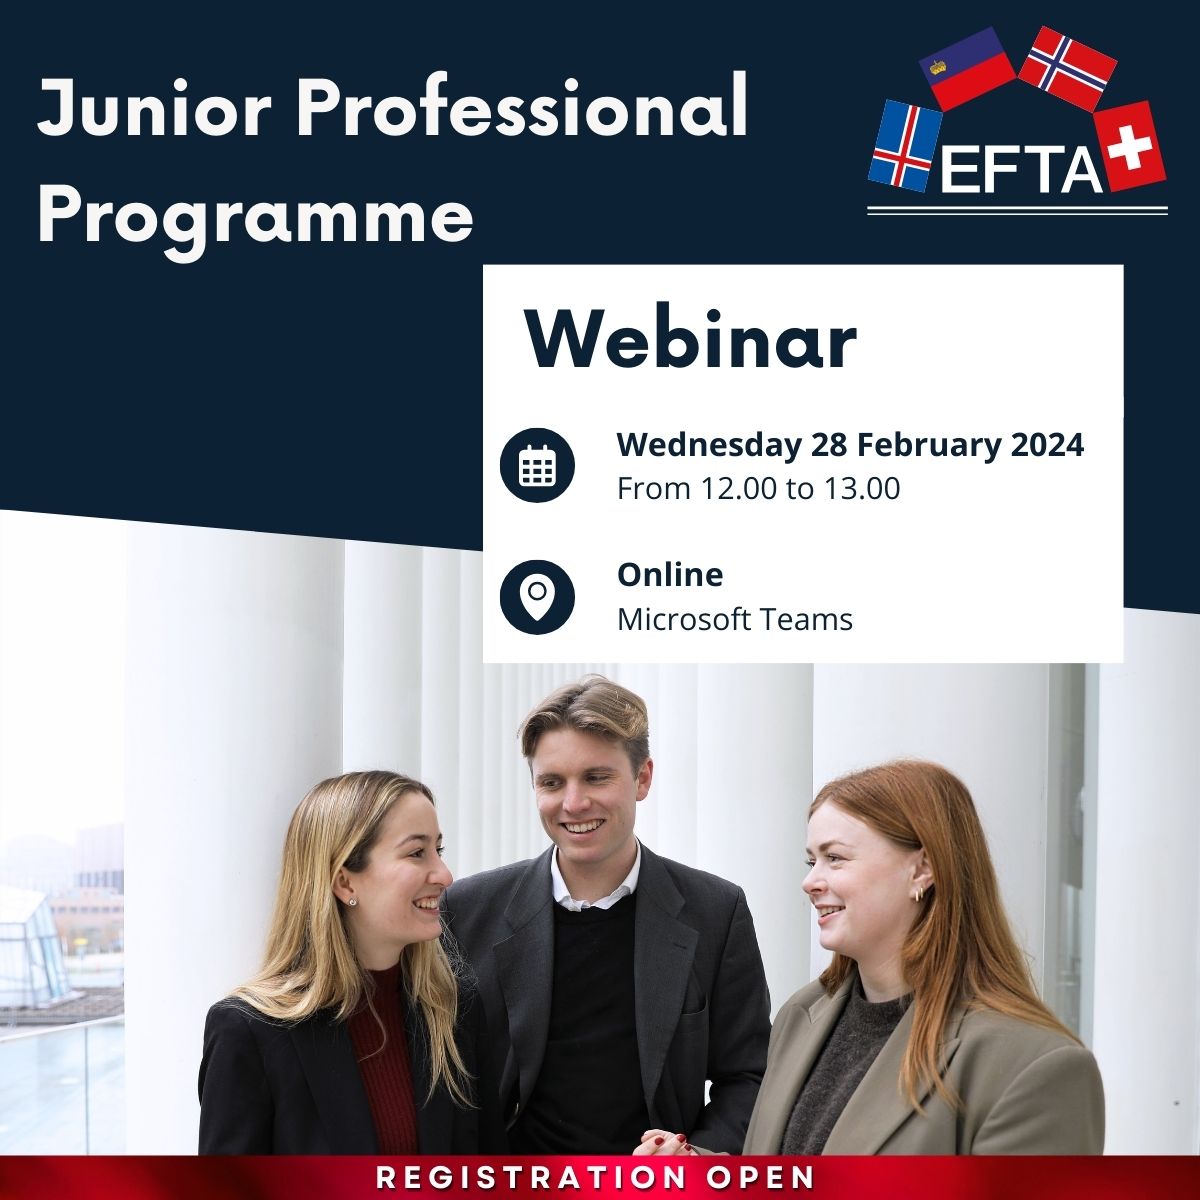 📢Only two days until the JPP Webinar!📢 Join us on Wednesday, 28 February, from 12.00 to 13.00 to learn more about the Junior Professional Programme in #Brussels, #Luxembourg and #Geneva. 🌐Webinar events.teams.microsoft.com/event/96c745c9… 📅Apply for the JPP by 6 March jobs.efta.int/wd/plsql/wd_po…